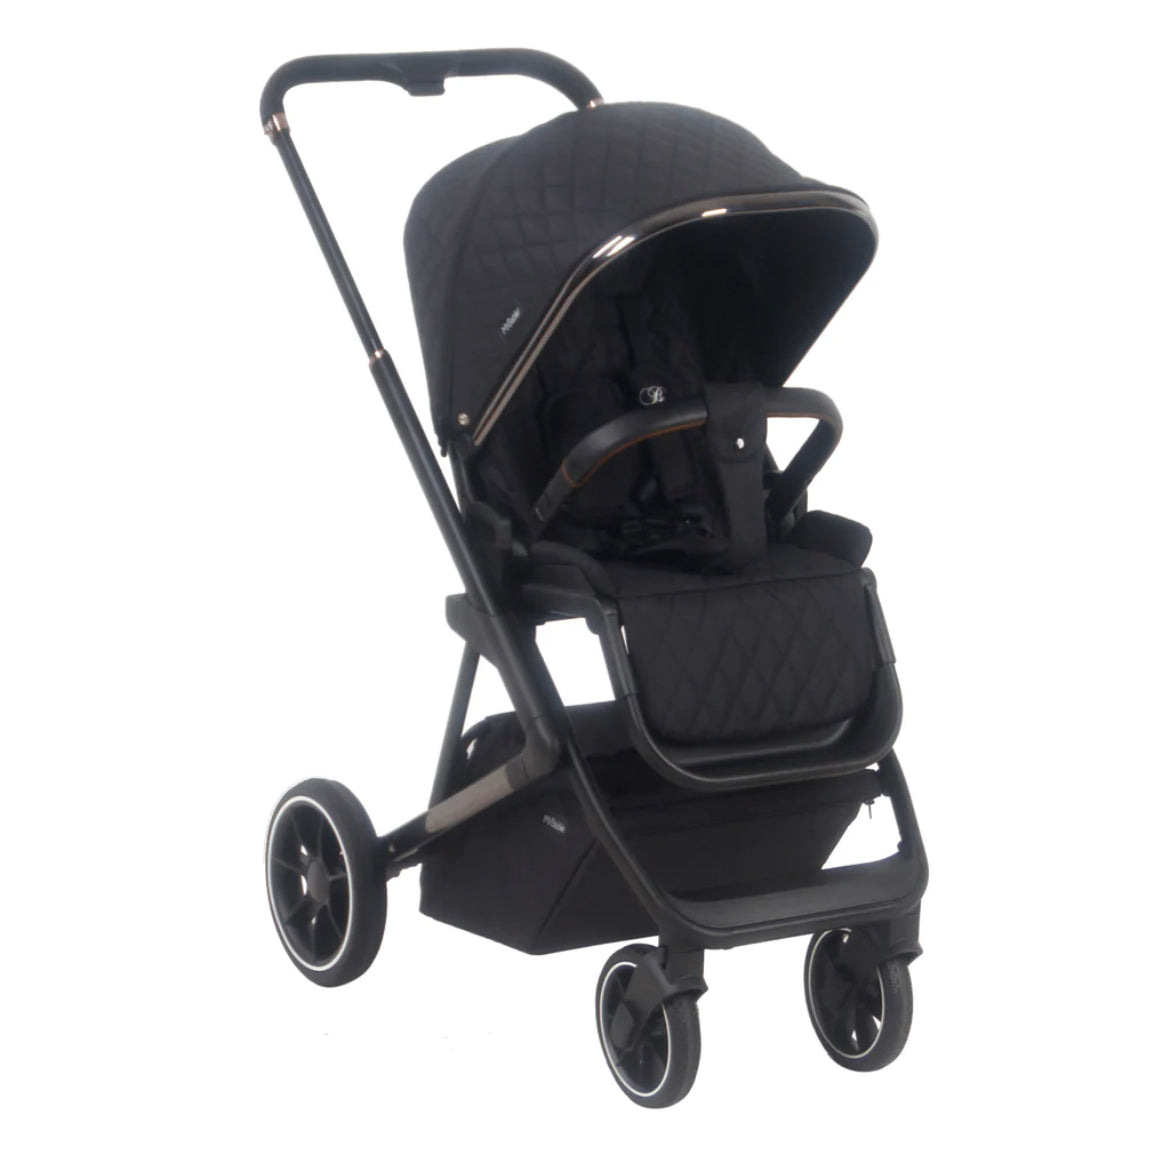 MB500i 3-in-1 Travel System with i-Size Car Seat - Billie Faiers Midnight Gunmetal